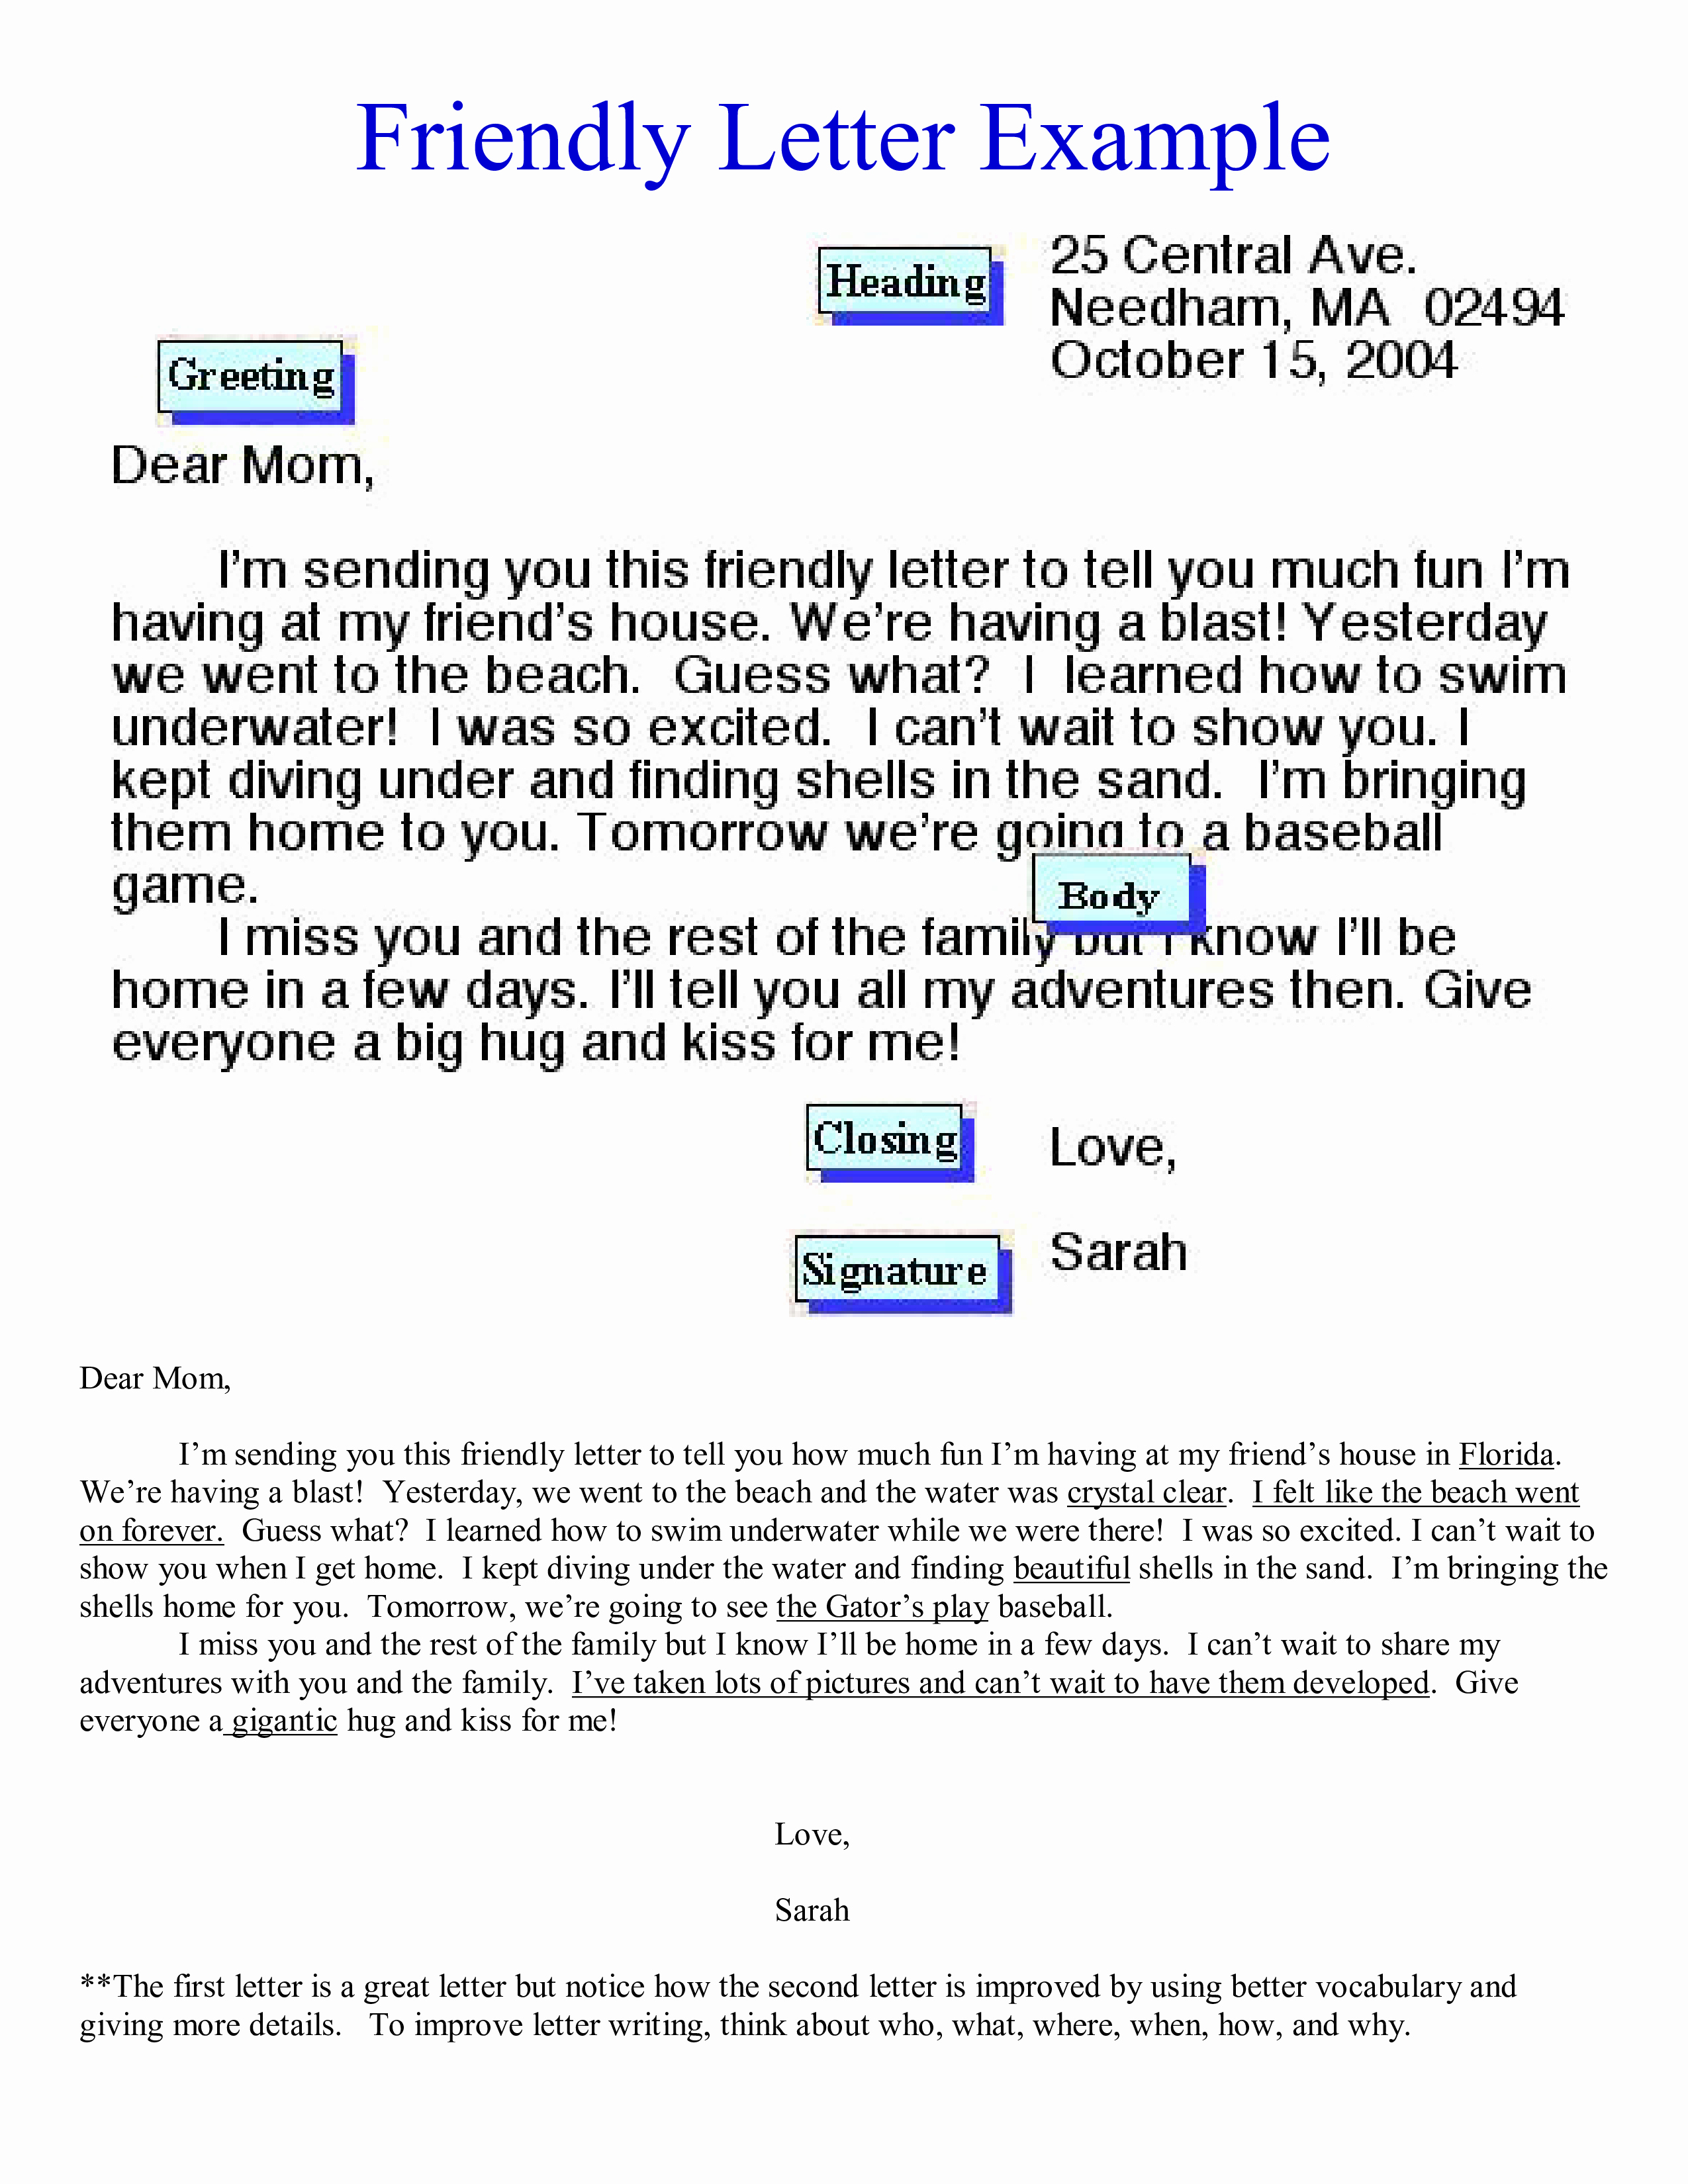 Template to Write A Letter Beautiful Free Friendly Letter format to Mom